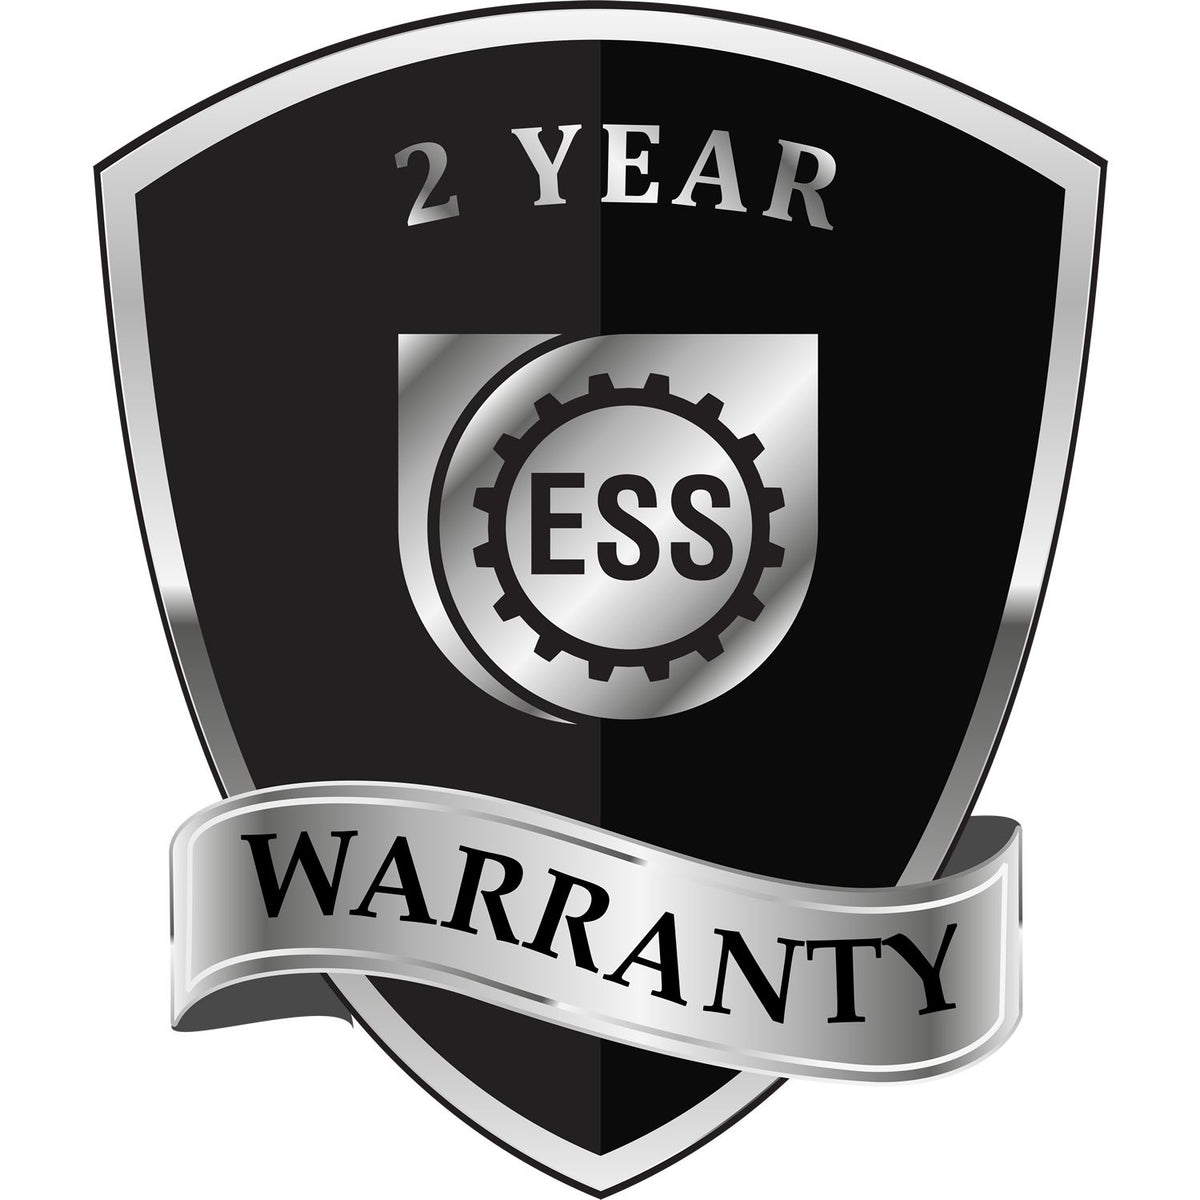 A black and silver badge or emblem showing warranty information for the Hybrid Idaho Geologist Seal